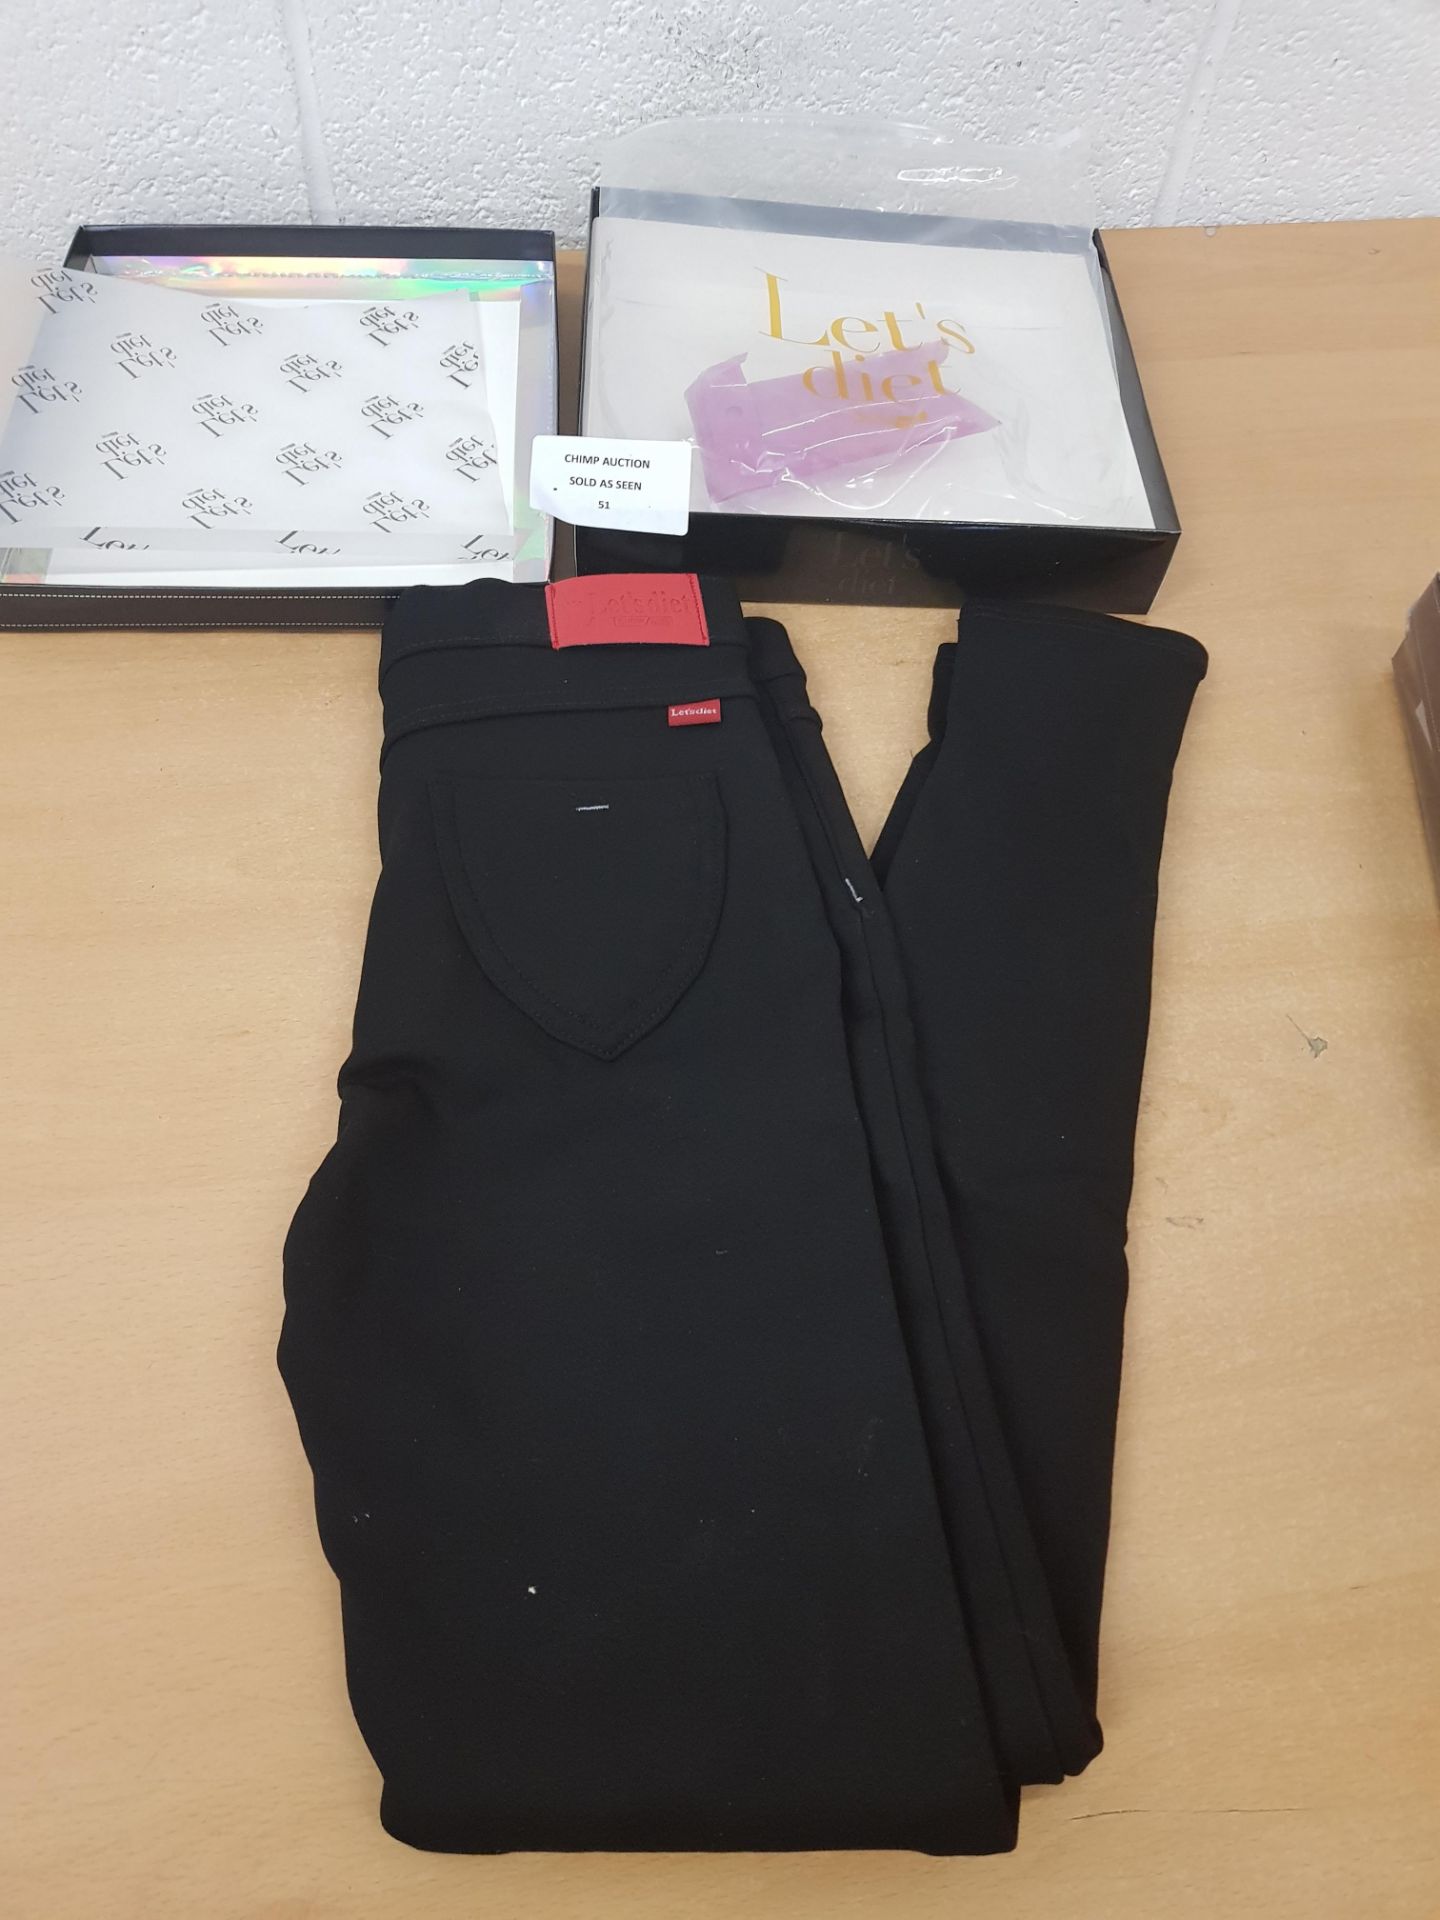 Brand new Let'sDiet ladies trousers Size S